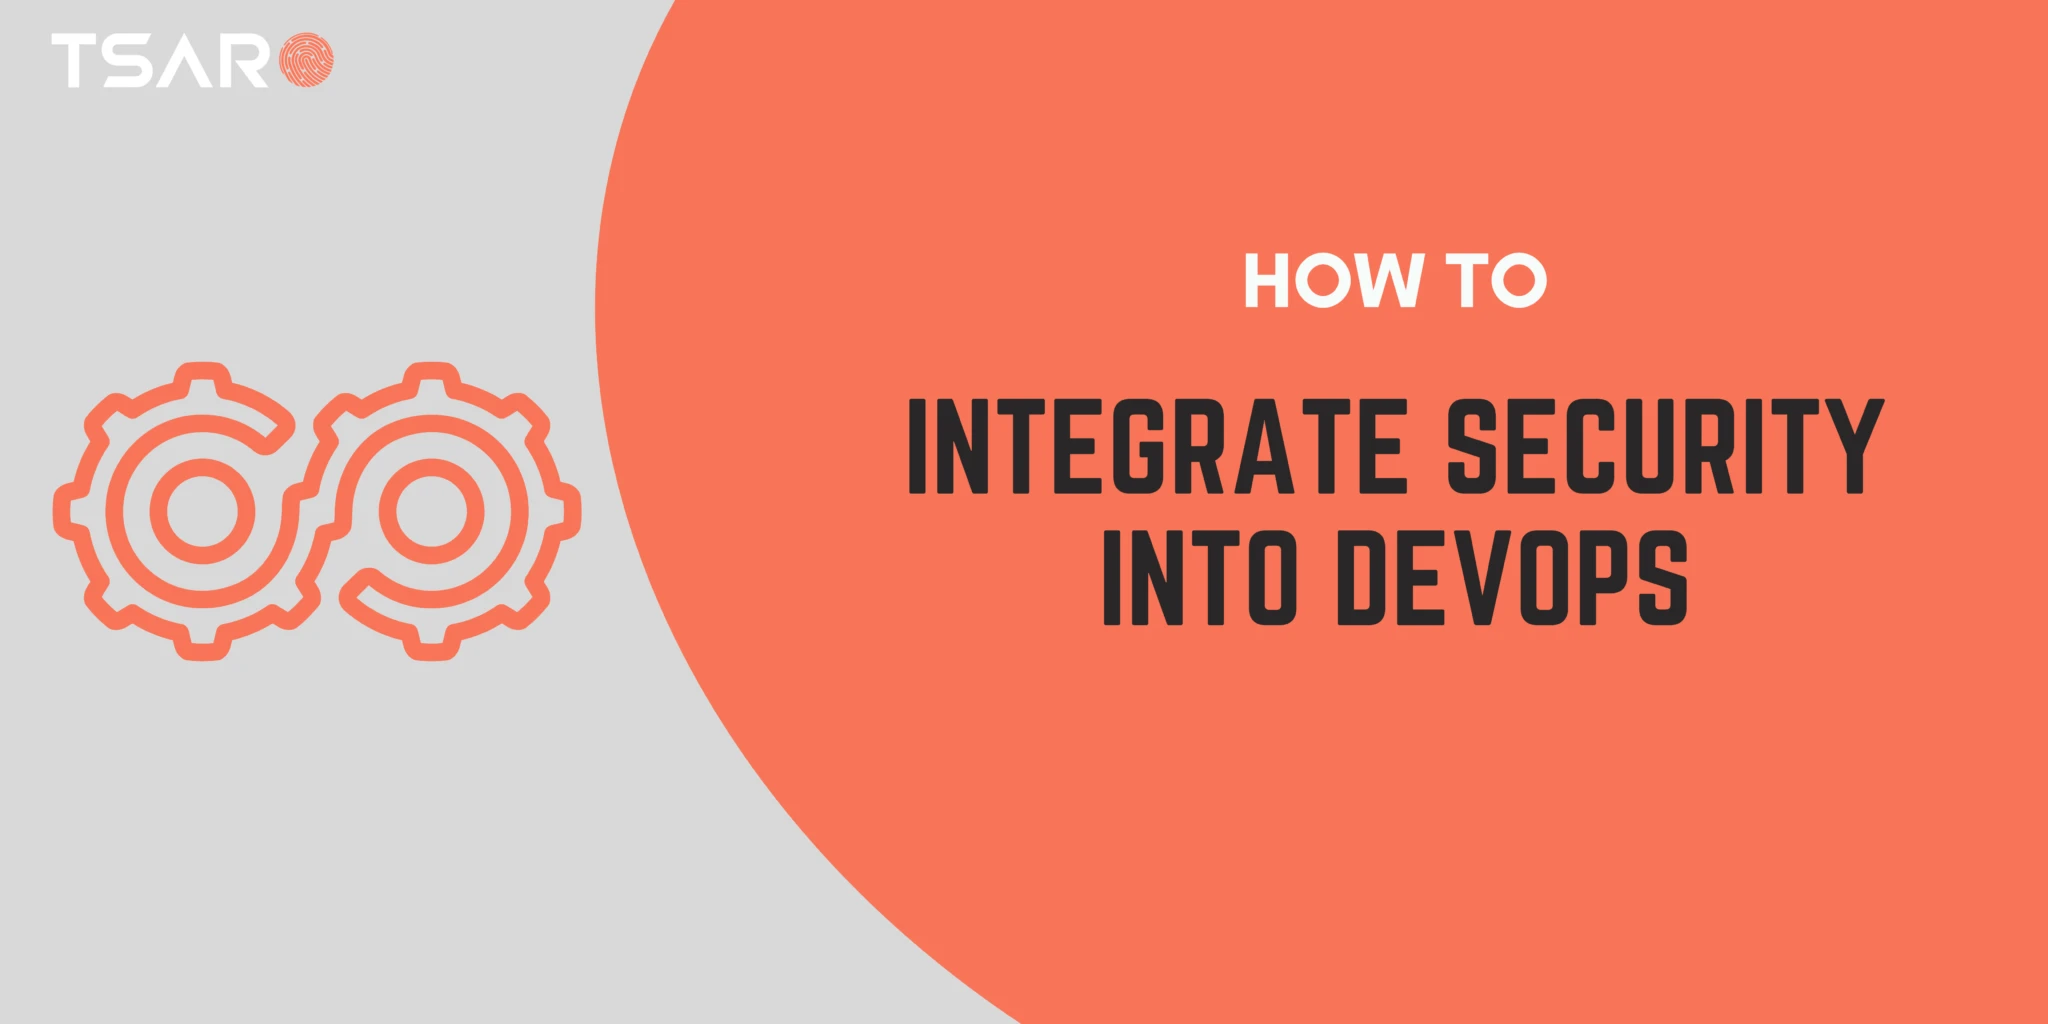 How to Integrate Security into DevOps